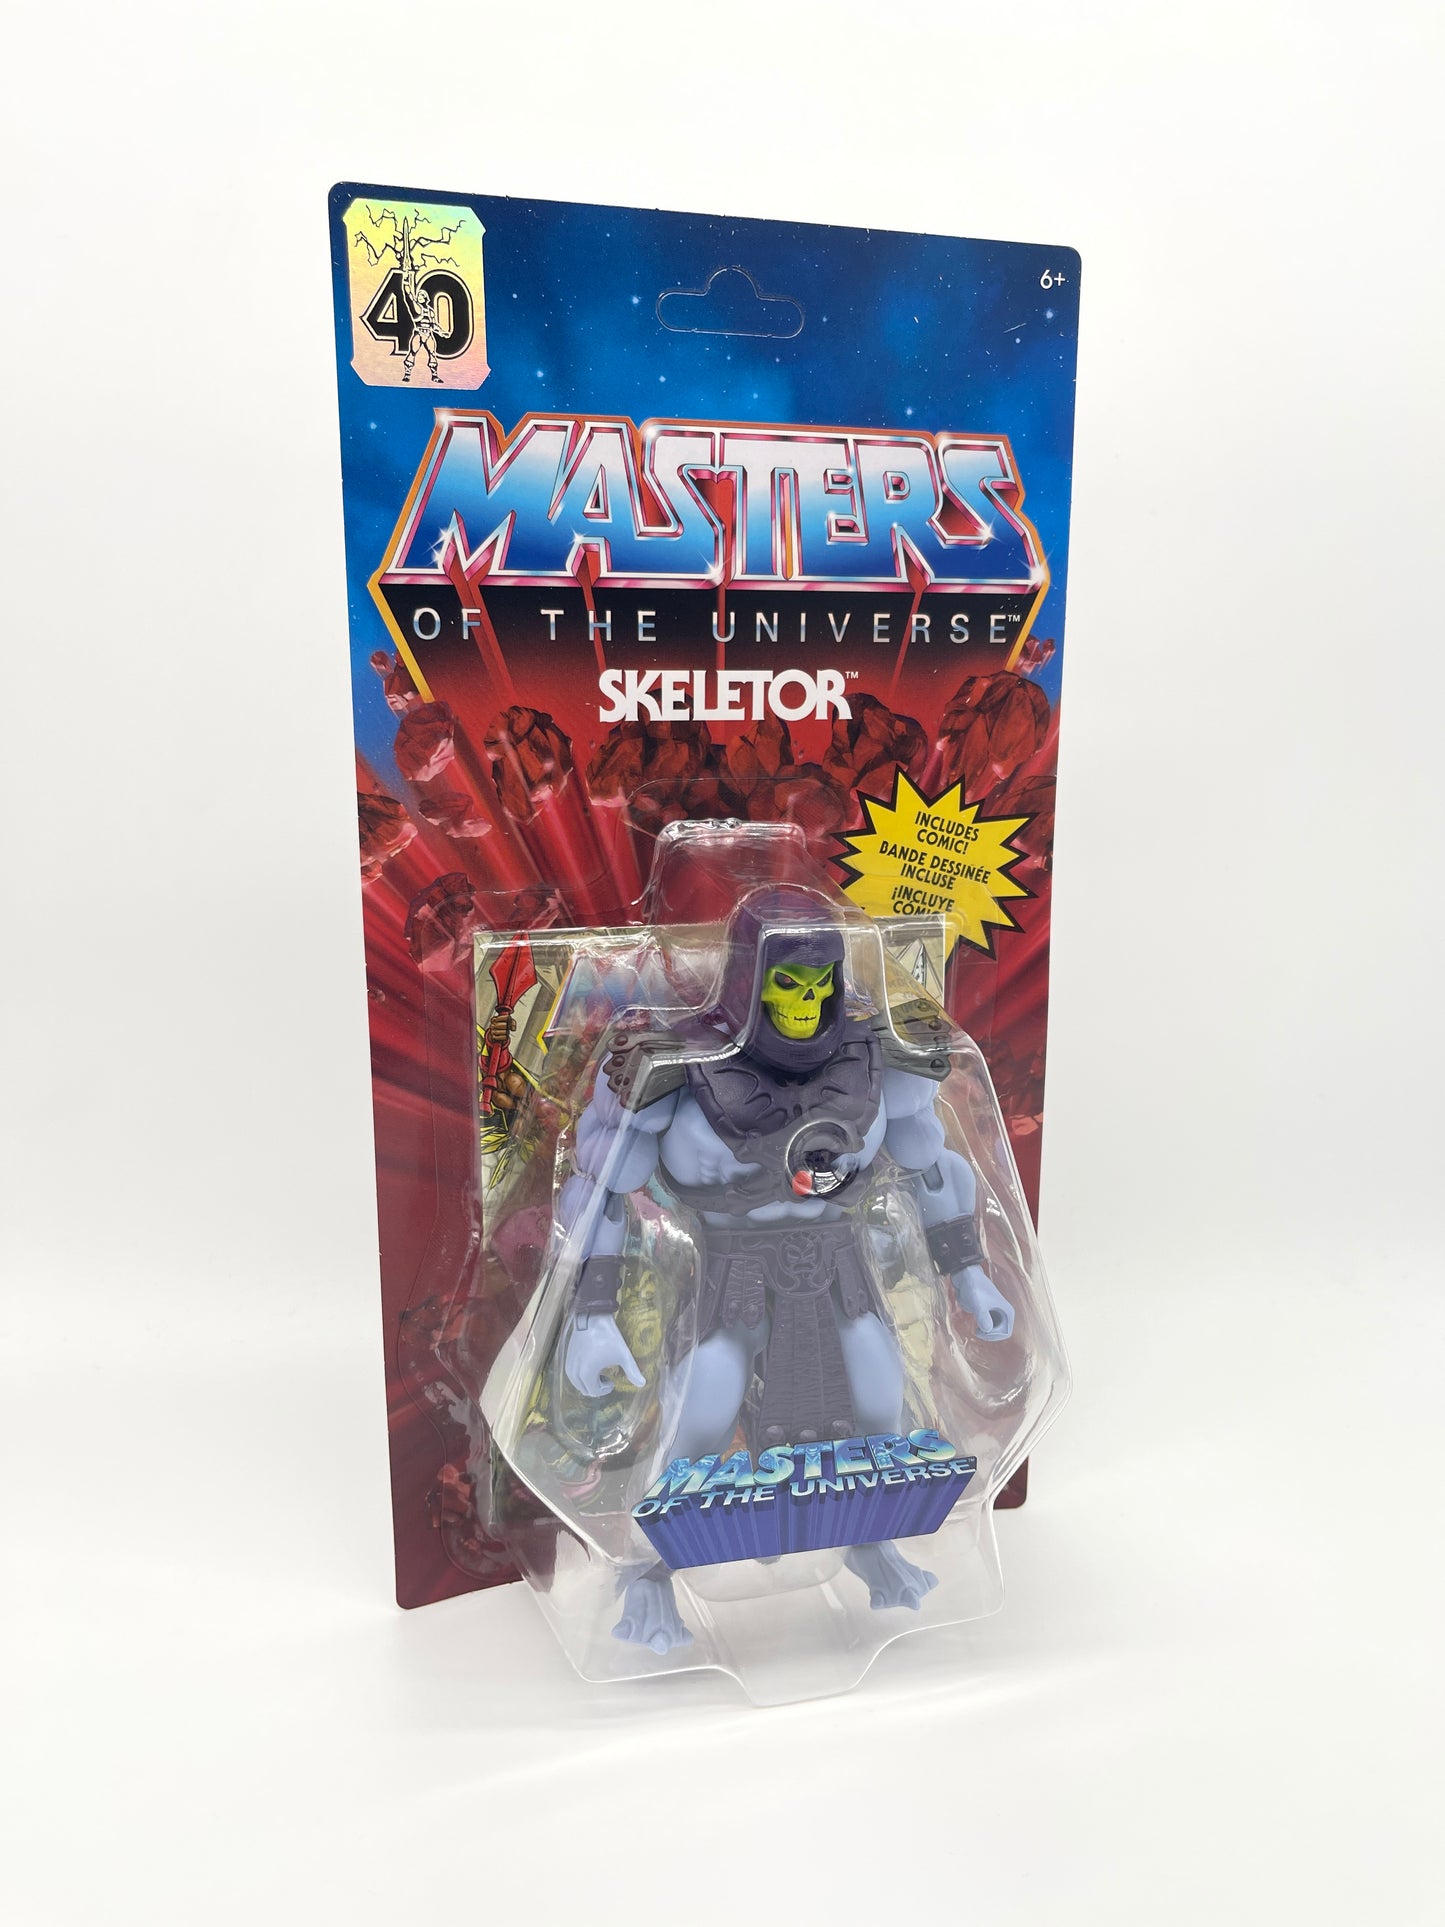 Masters of the Universe Origins "Skeletor 200x 40th Anniversary" unpunched MOTU